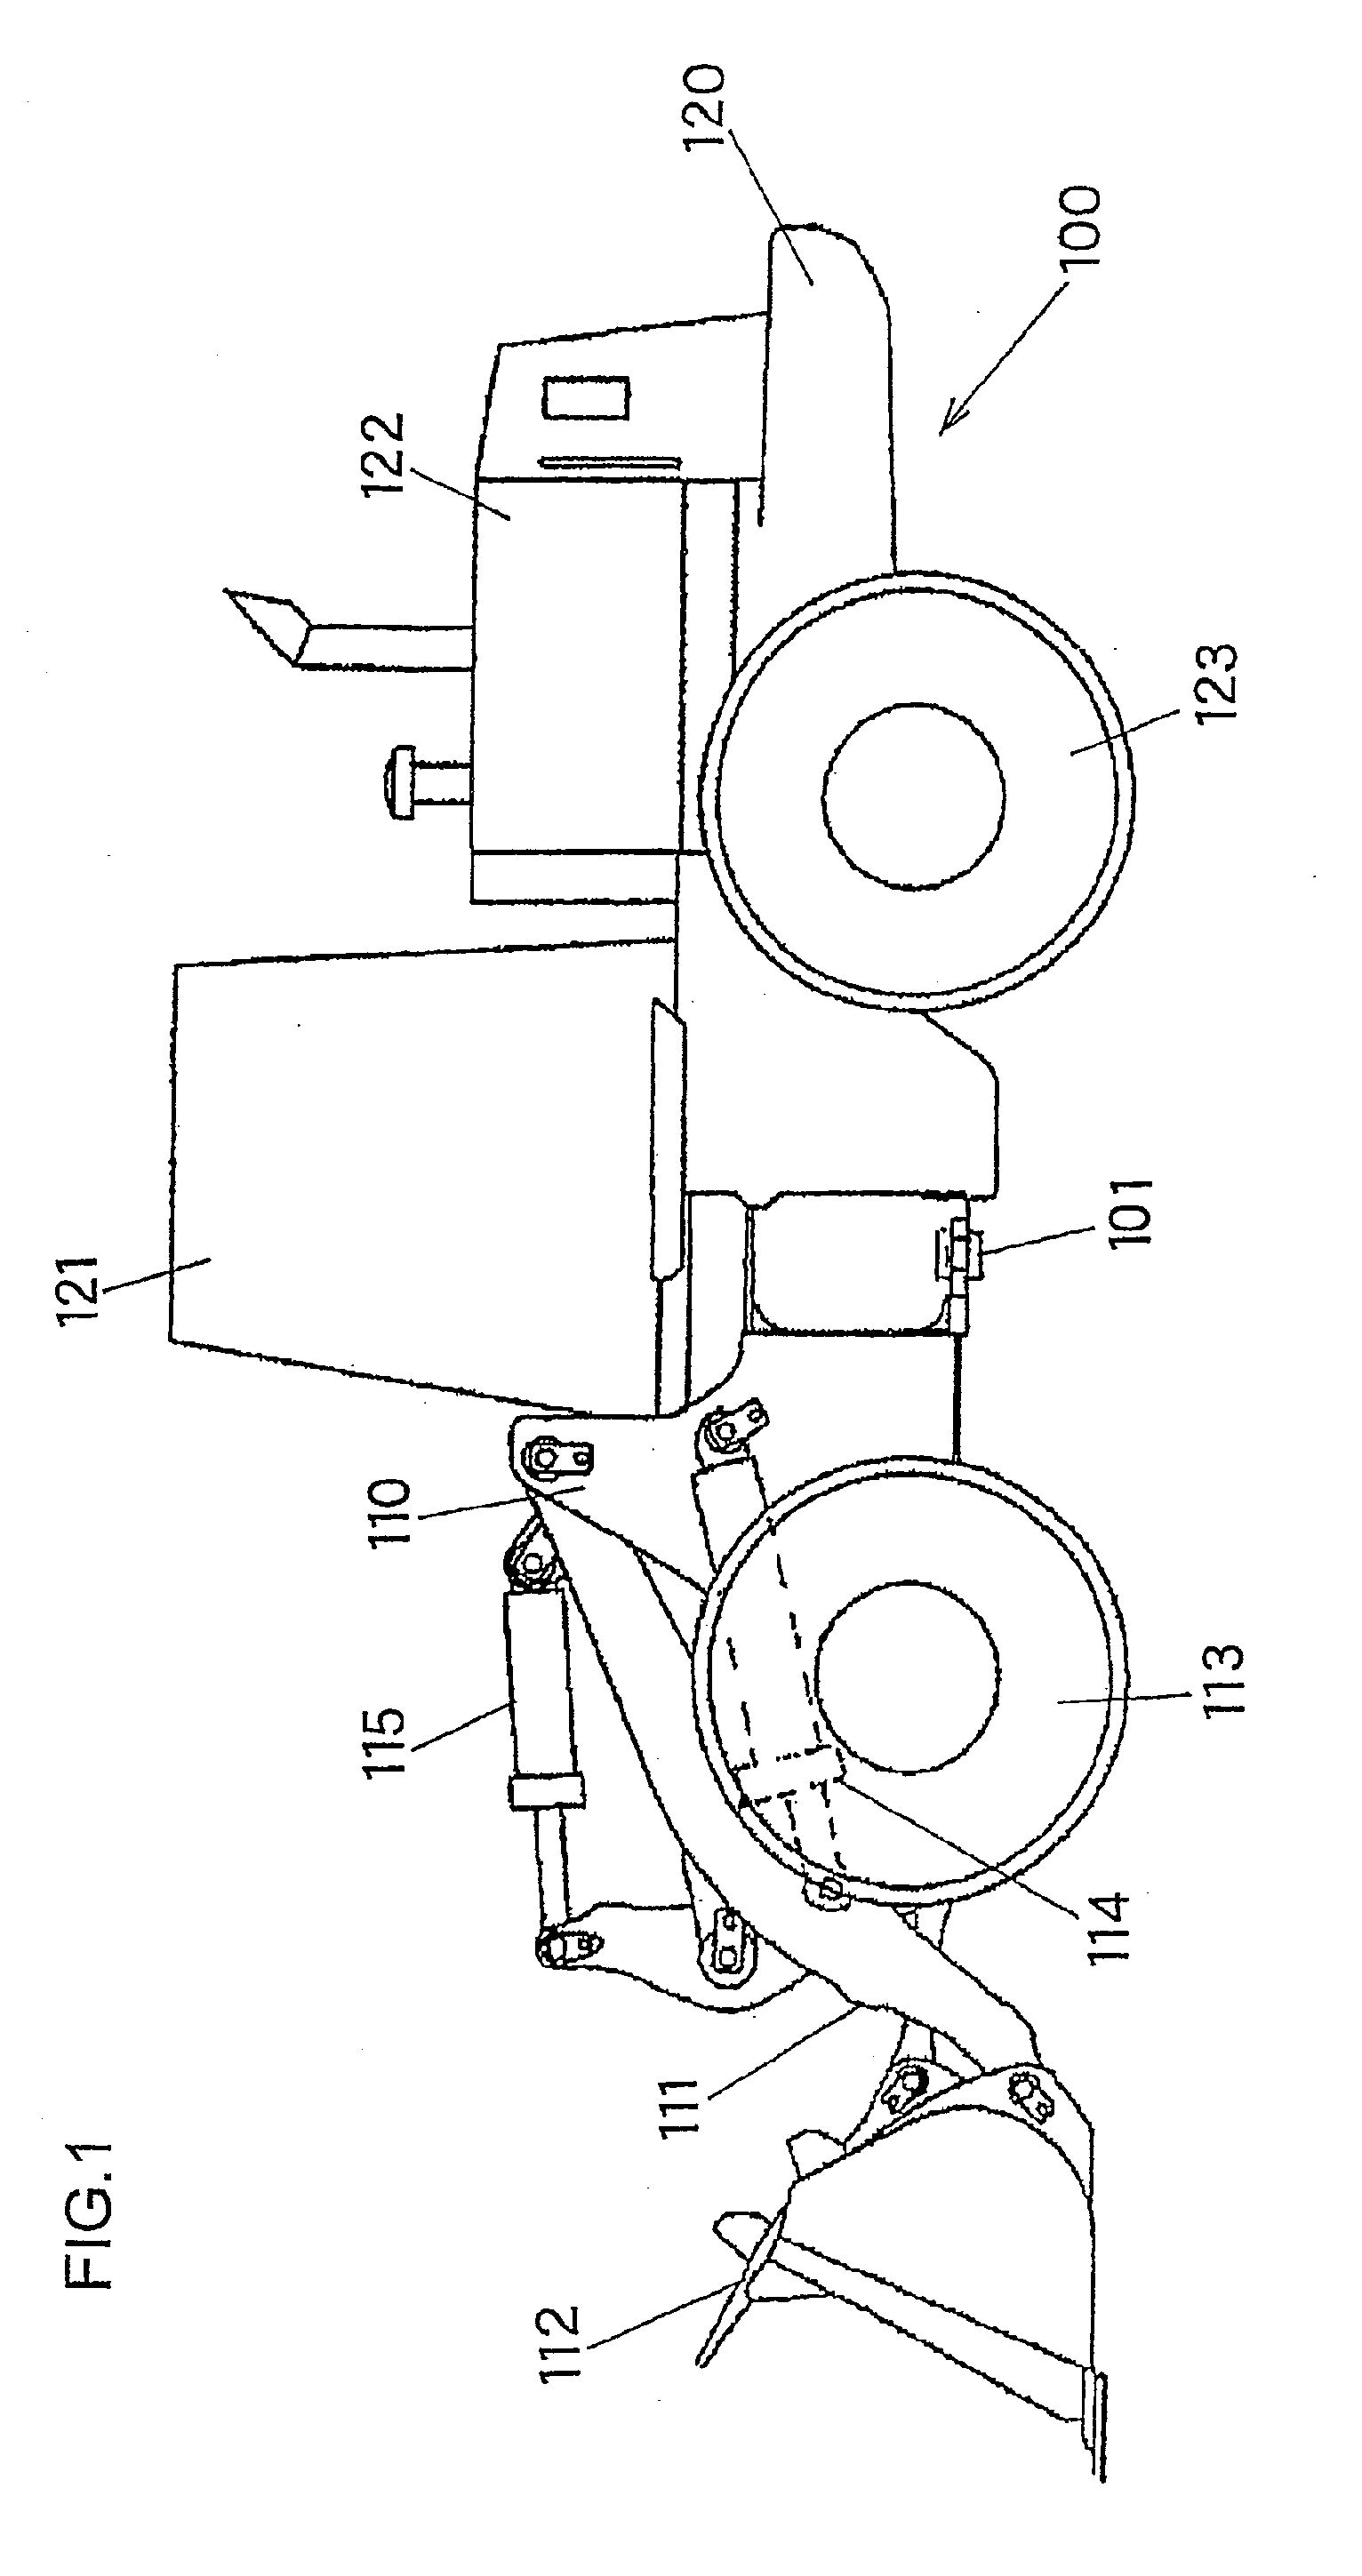 Travel Drive System for Work Vehicle, Work Vehicle, and Travel Drive Method